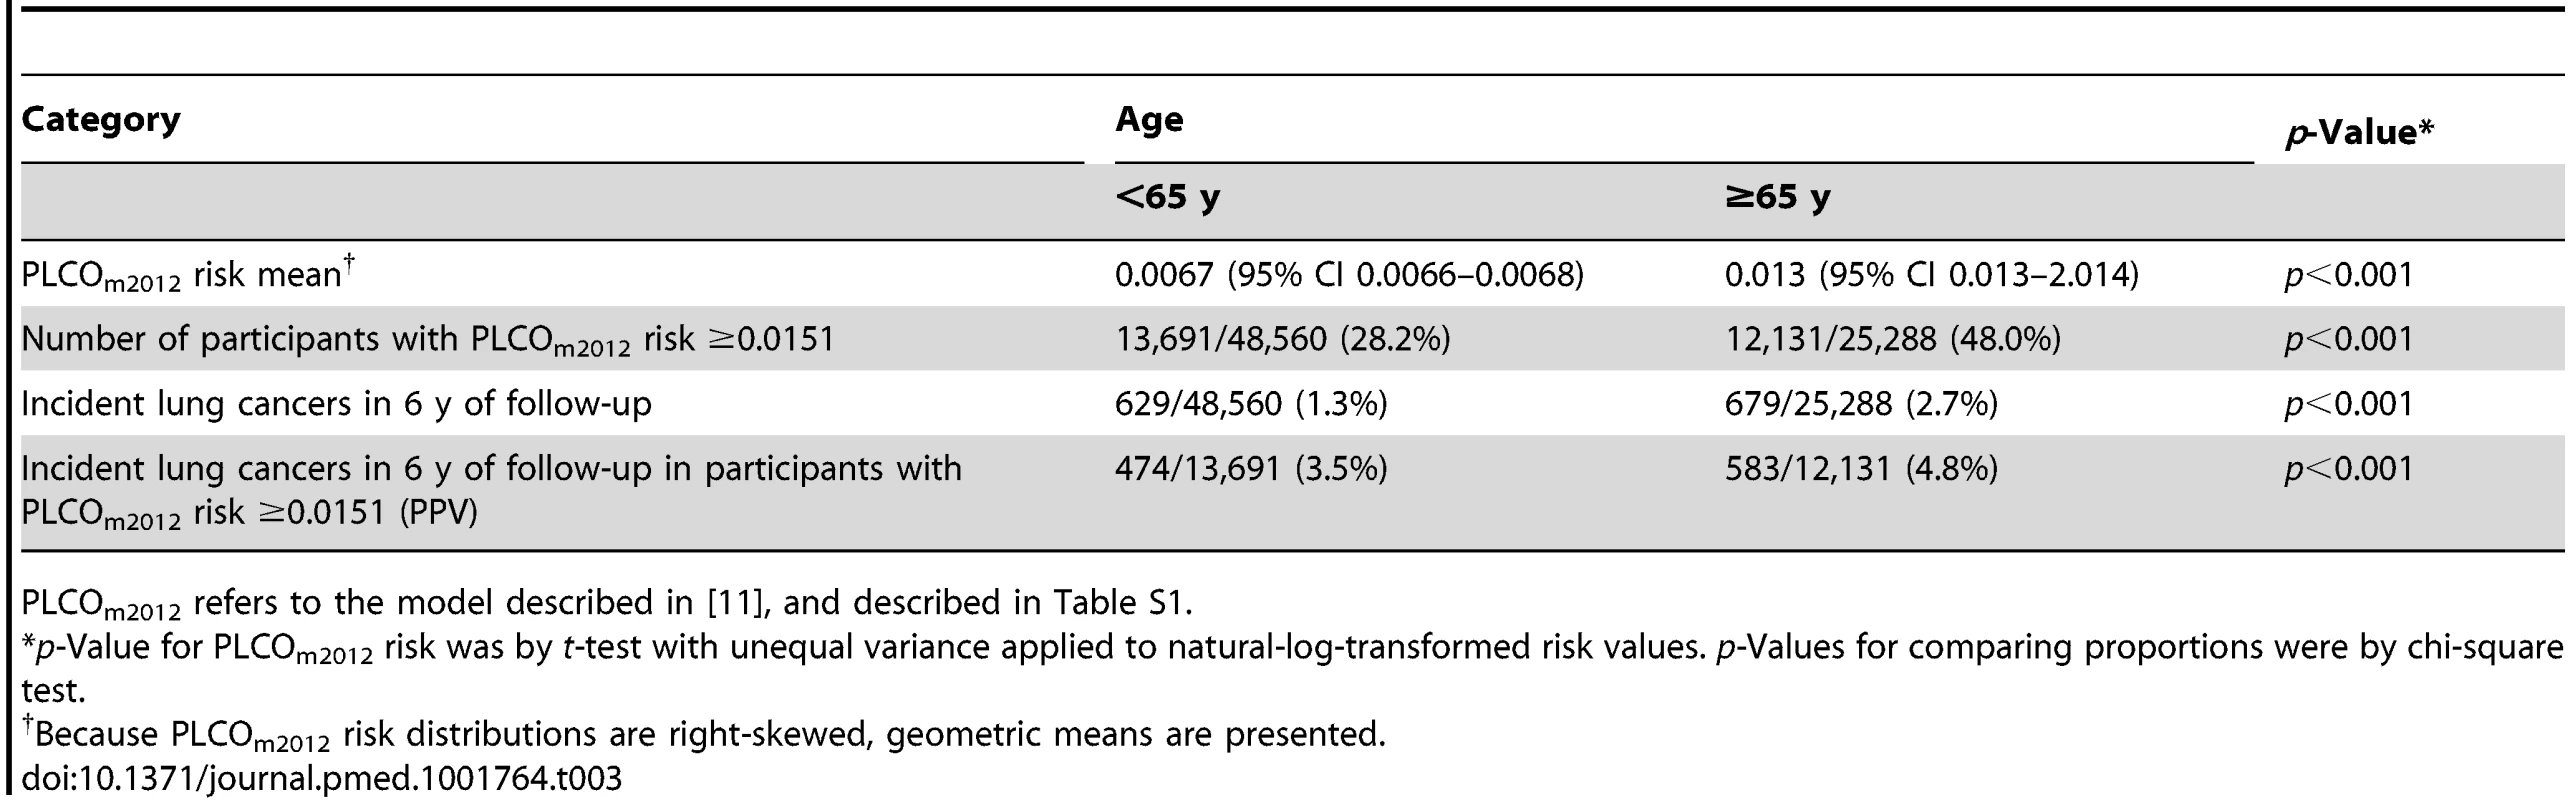 Comparison of PLCO<sub>m2012</sub> risk and incident lung cancer in age strata of PLCO smokers dichotomized at age 65 y.